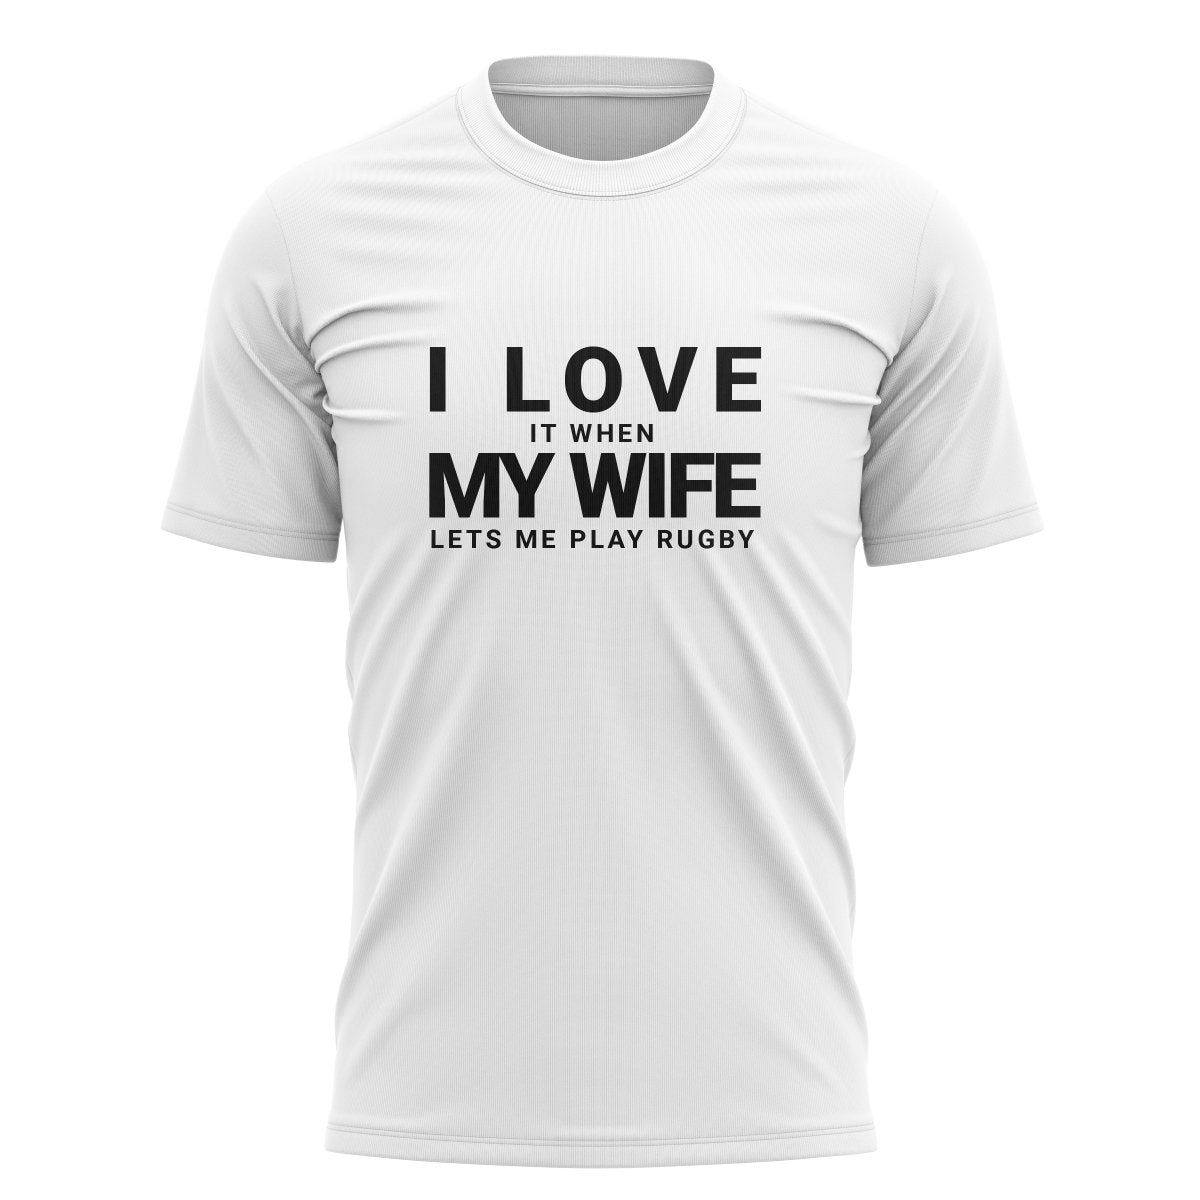 I Love My Wife Graphic Tee - www.therugbyshop.com www.therugbyshop.com MEN&#39;S / WHITE / S SANMAR TEES I Love My Wife Graphic Tee